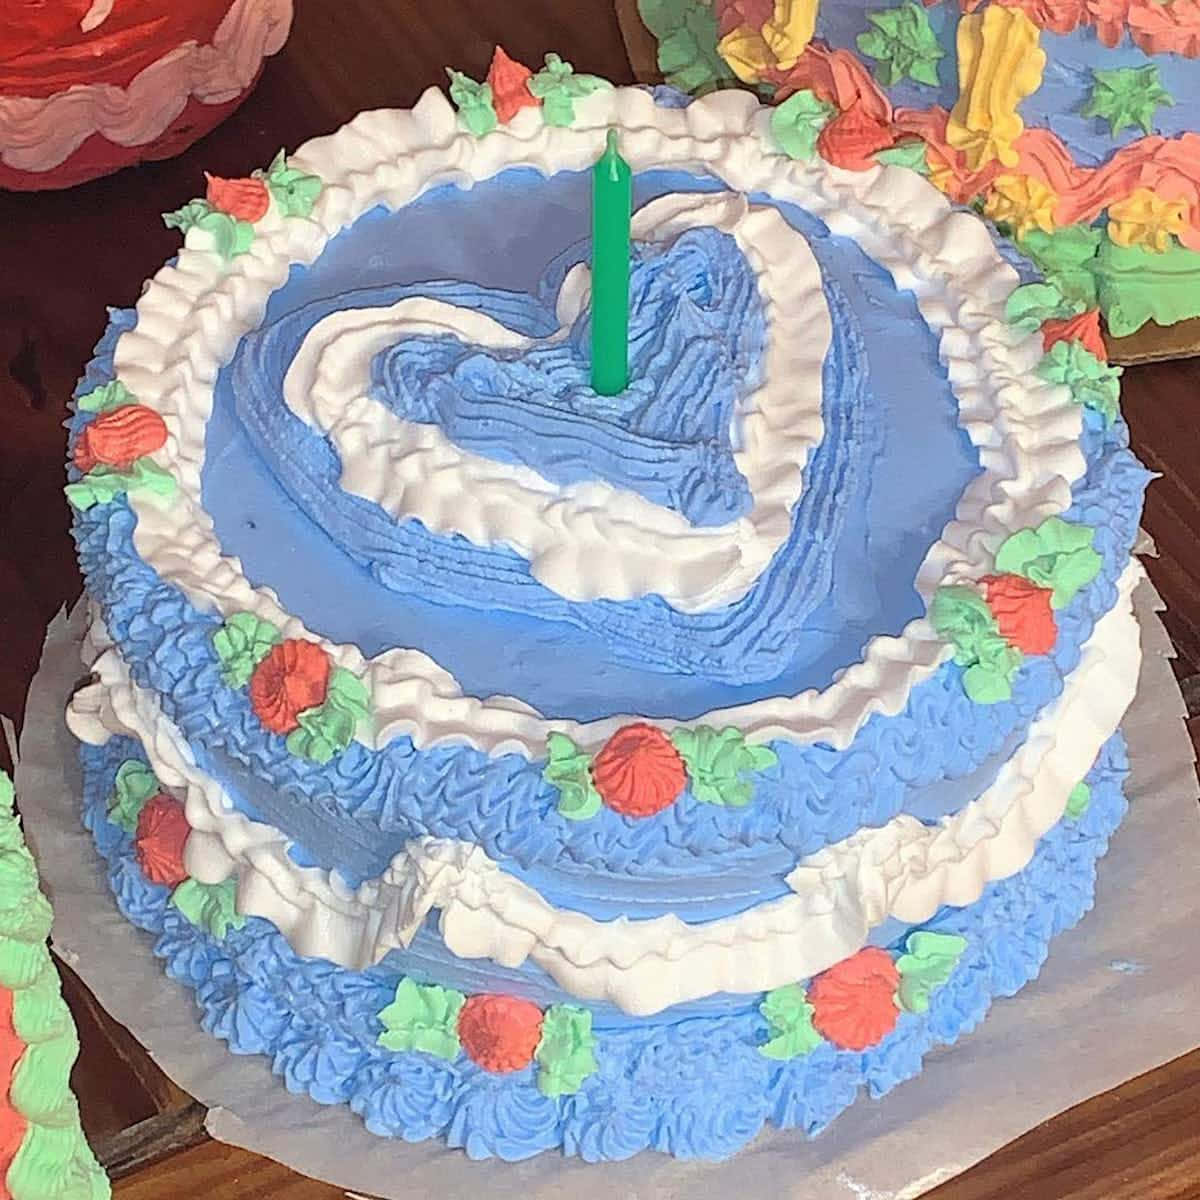 A Blue And White Cake With A Candle